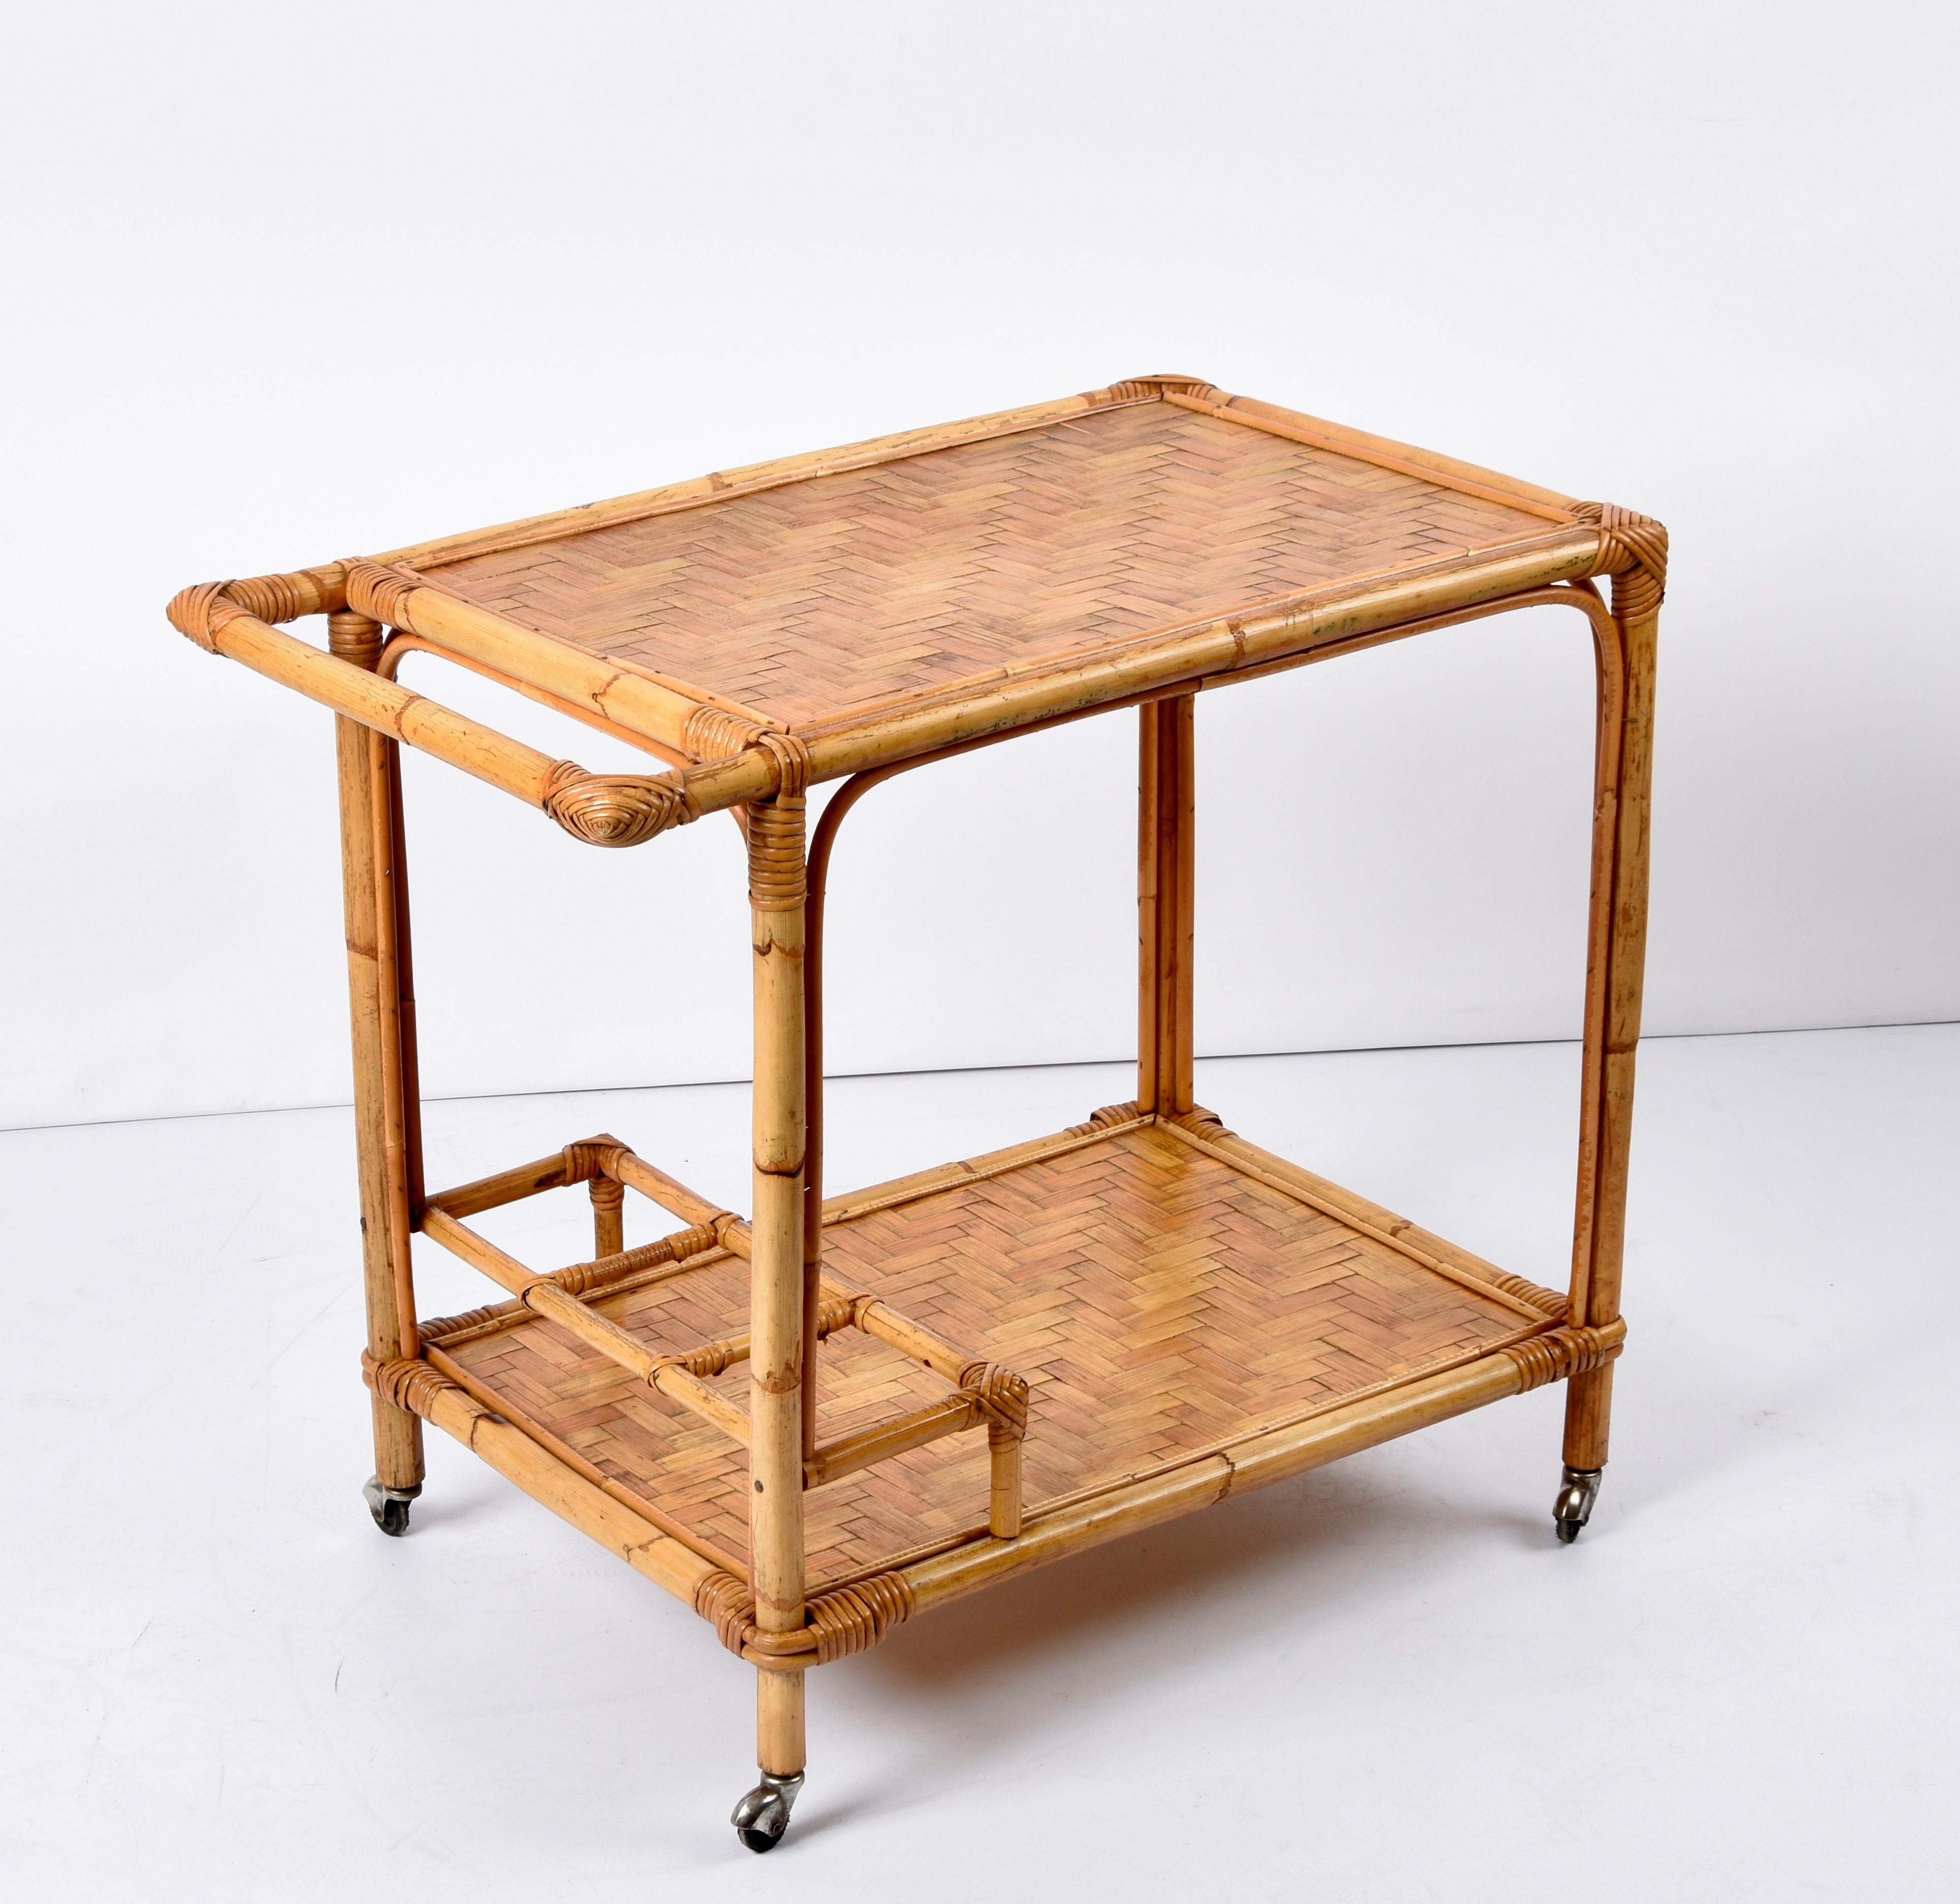 Midcentury bamboo cane and rattan rectangular bar cart trolley with wheels. This unique piece was produced in Italy during the 1960s.

A wonderful item in a fantastic vintage condition, with four small wheels and two squared bottle holders within